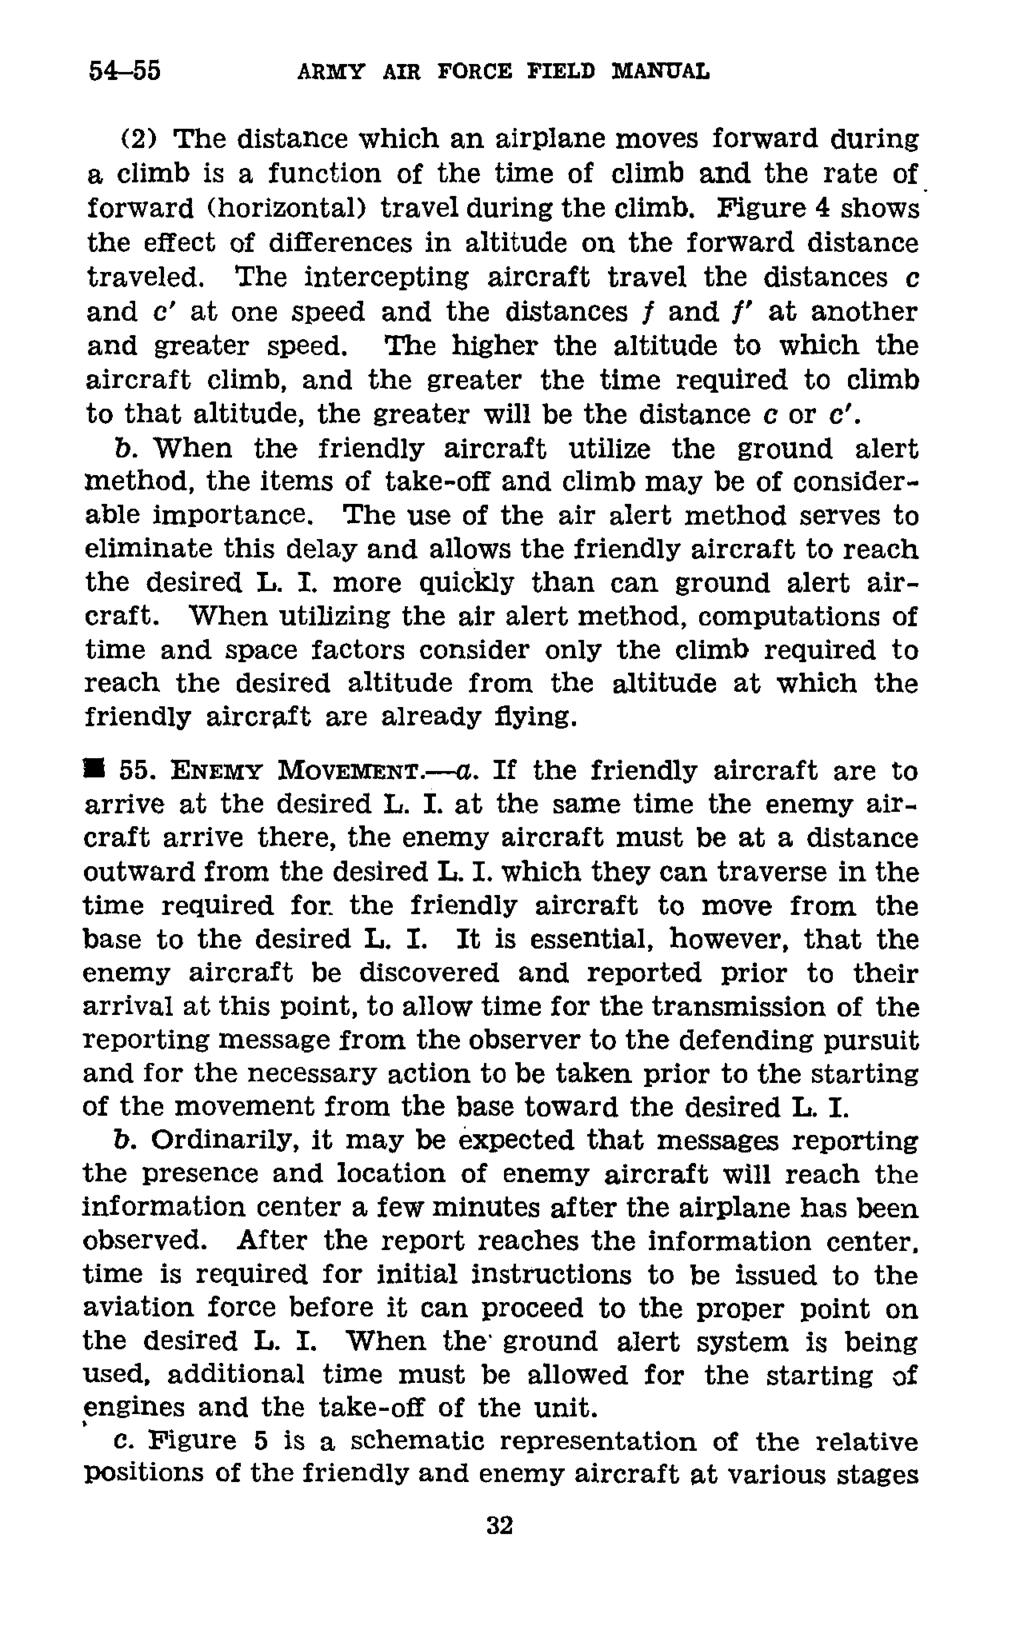 54-55 ARMY AIR FORCE FIELD MANUAL (2) The distance which an airplane moves forward during a climb is a function of the time of climb and the rate of forward (horizontal) travel during the climb.